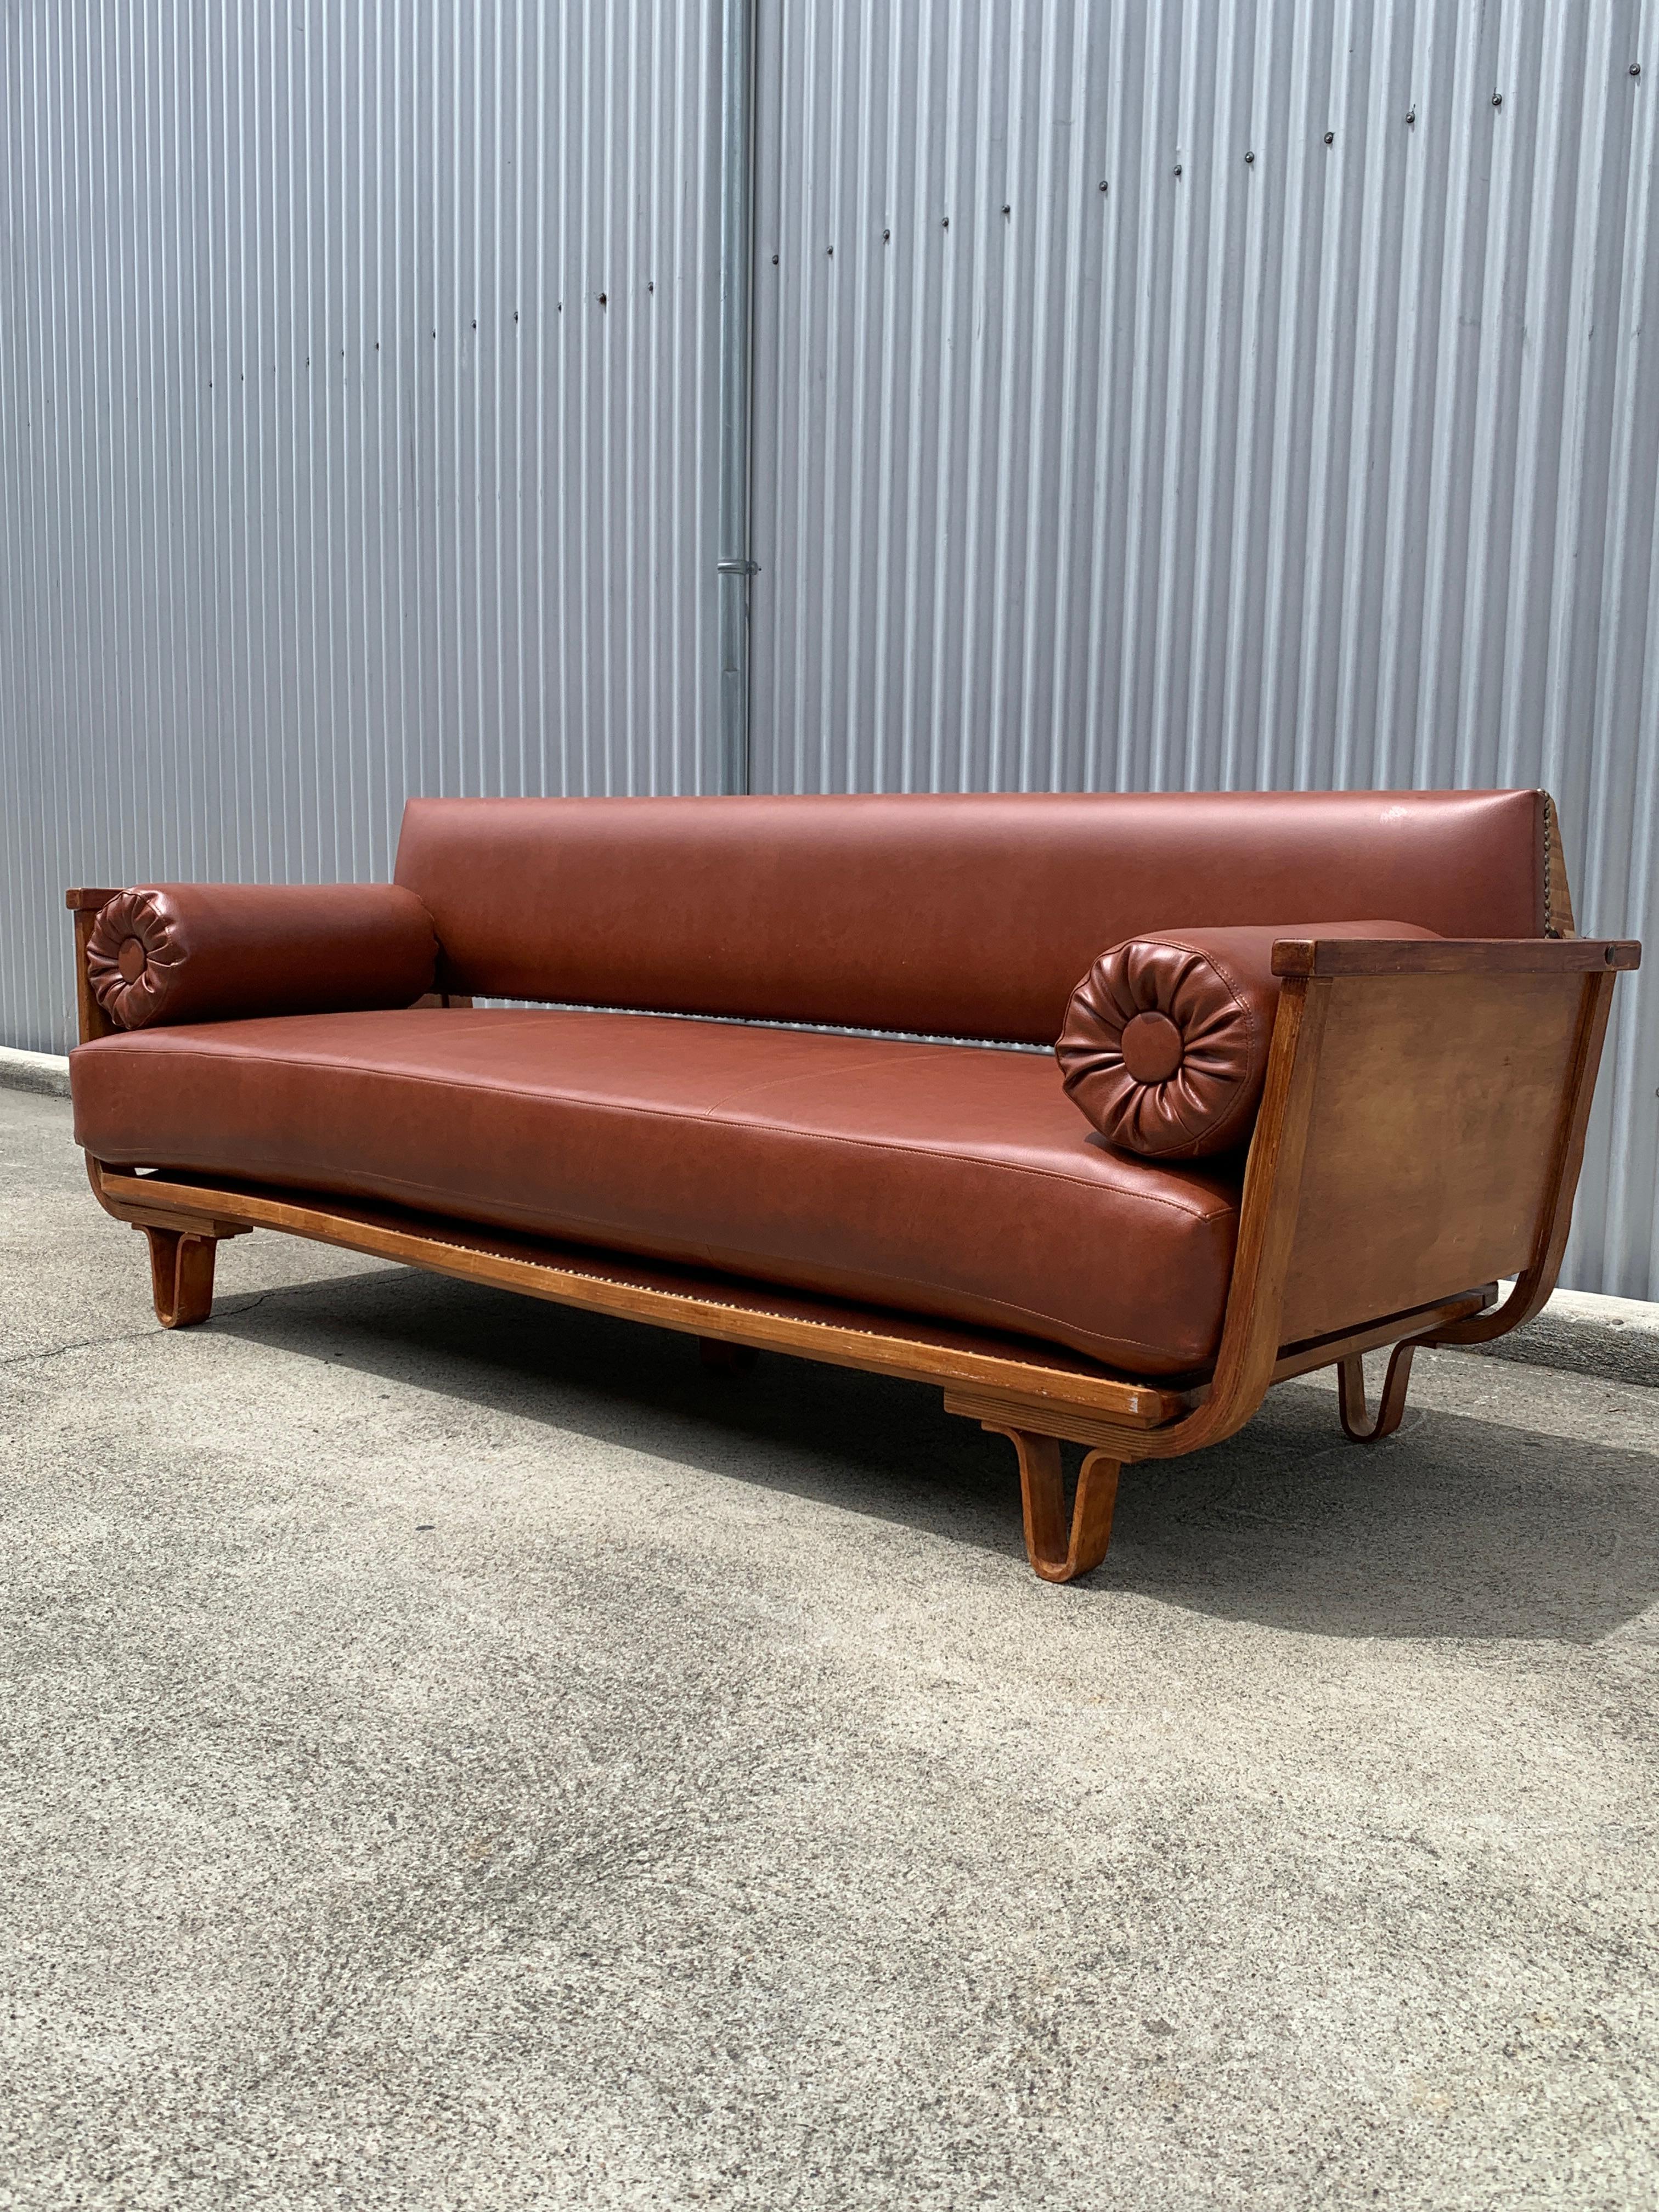 MB 01 Daybed Sofa by Cees Braakman In Fair Condition For Sale In Danville, CA